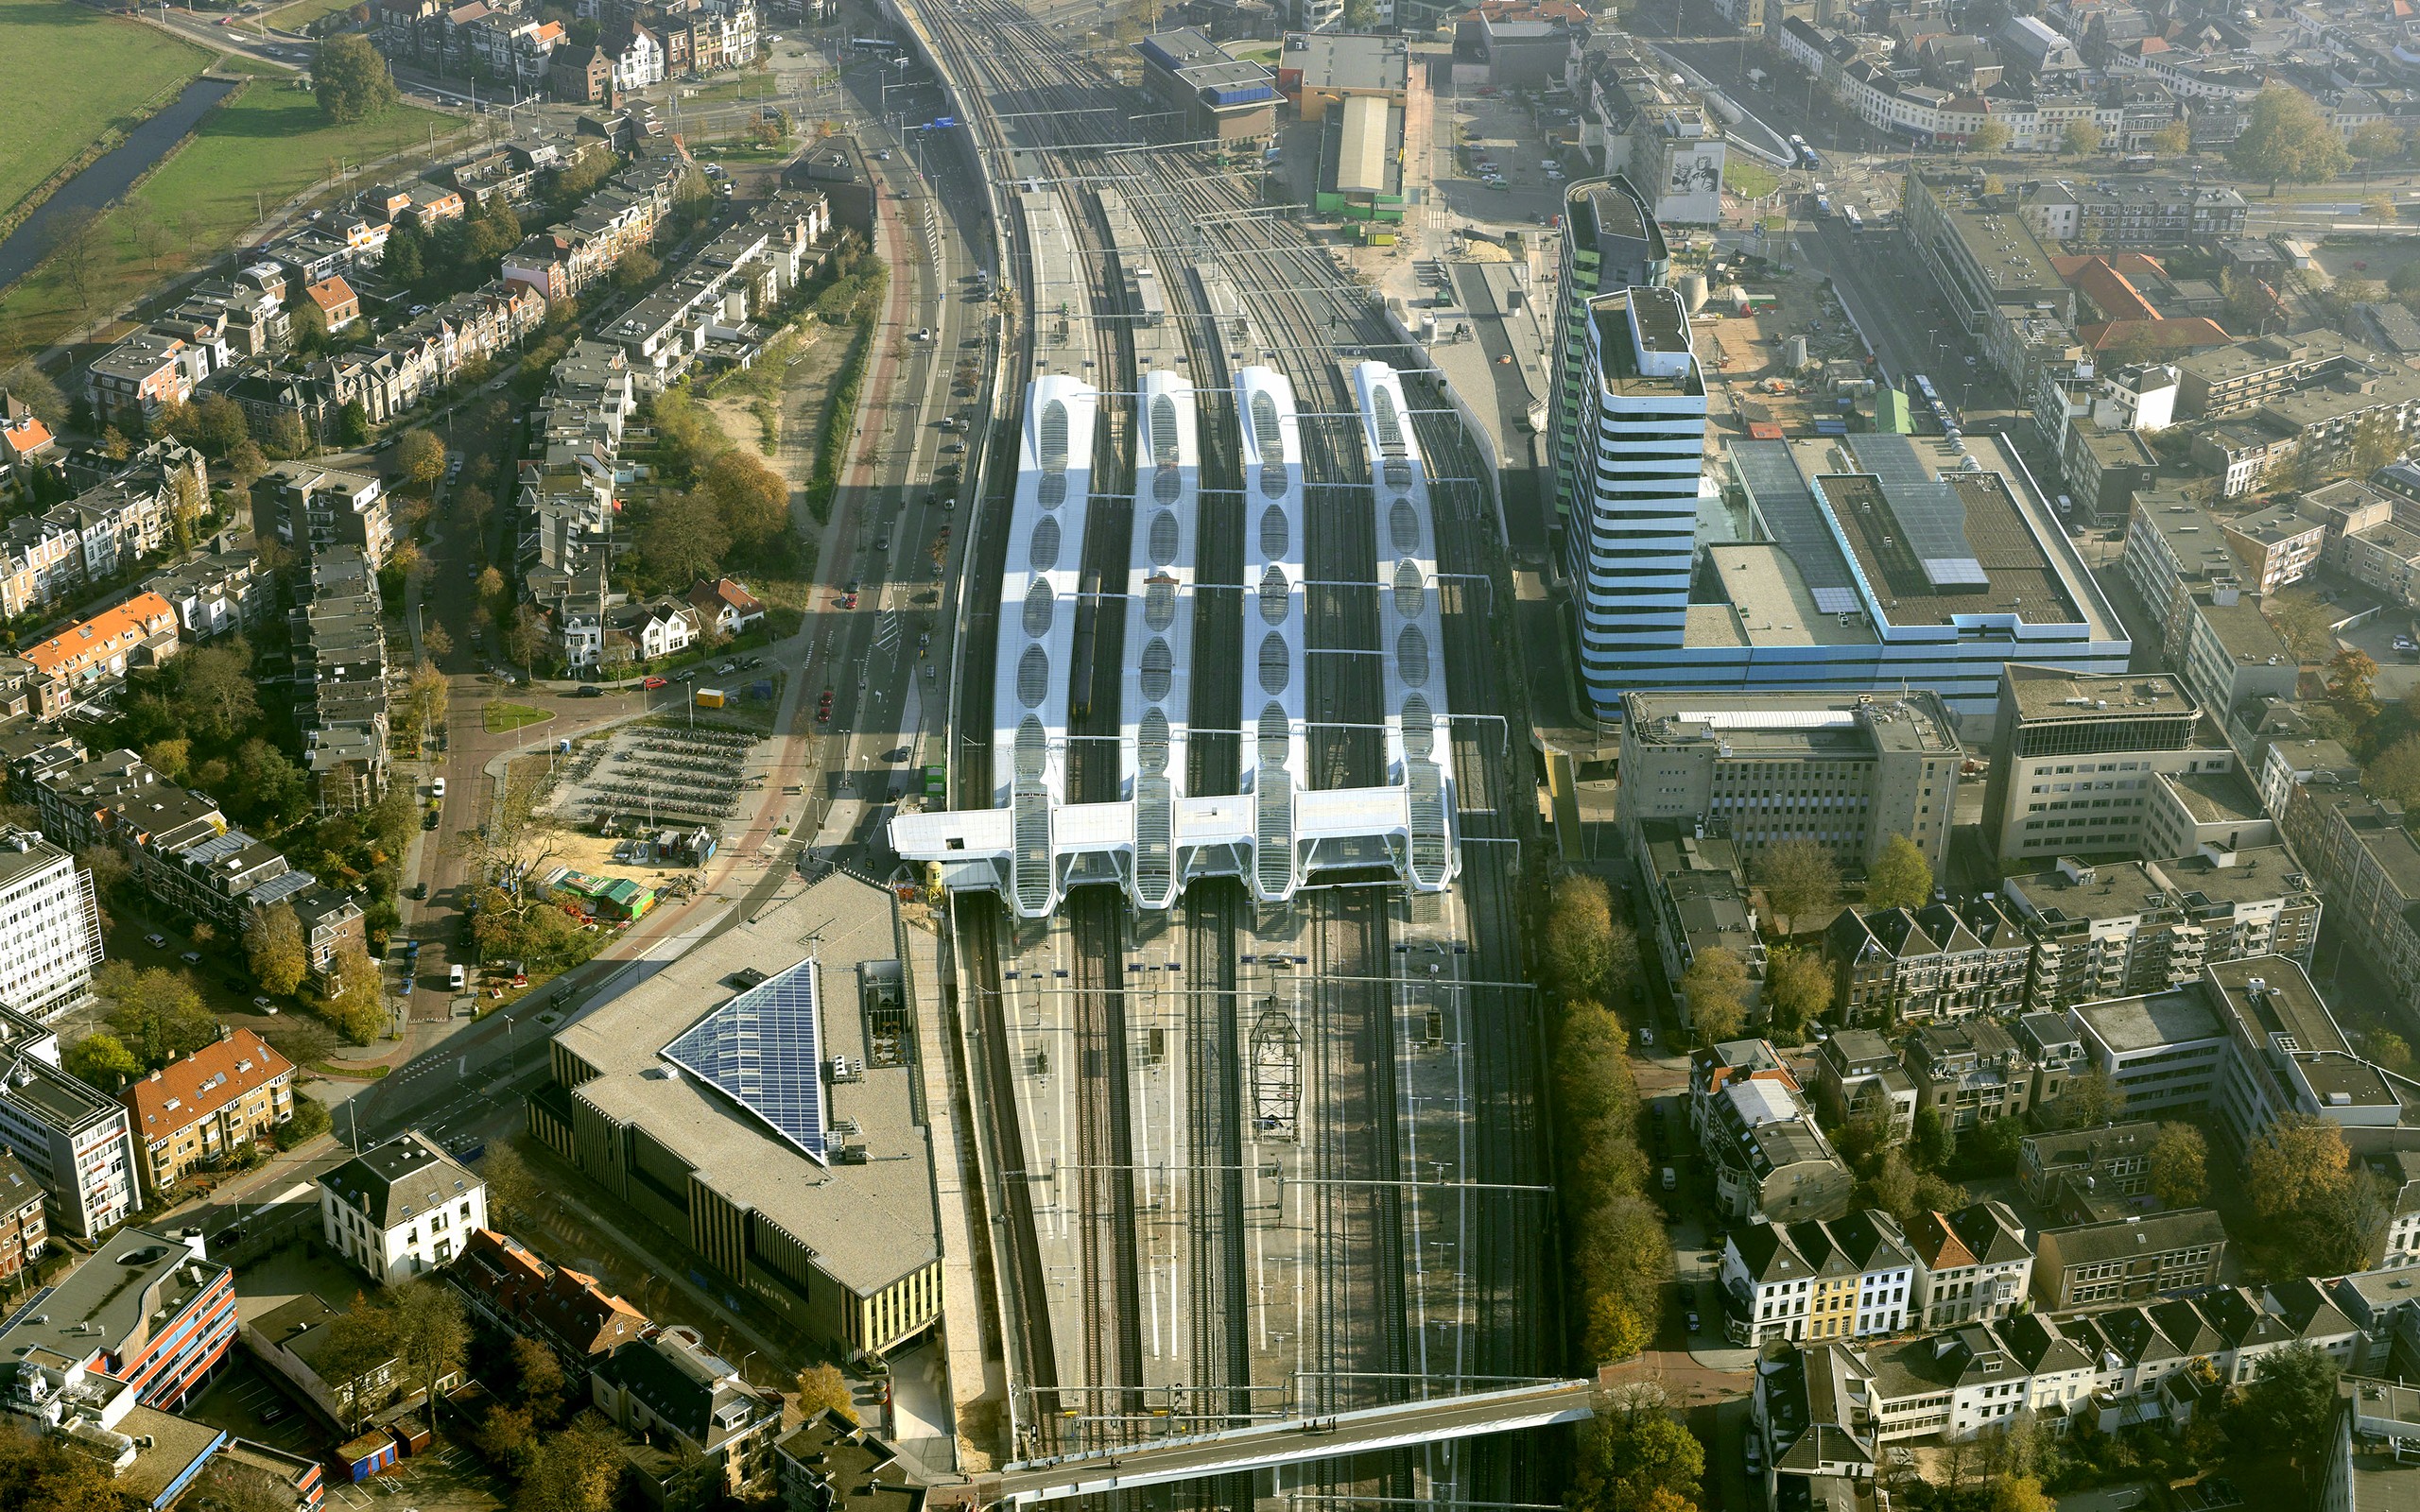 Train Station City Aerial View Europe 2560x1600